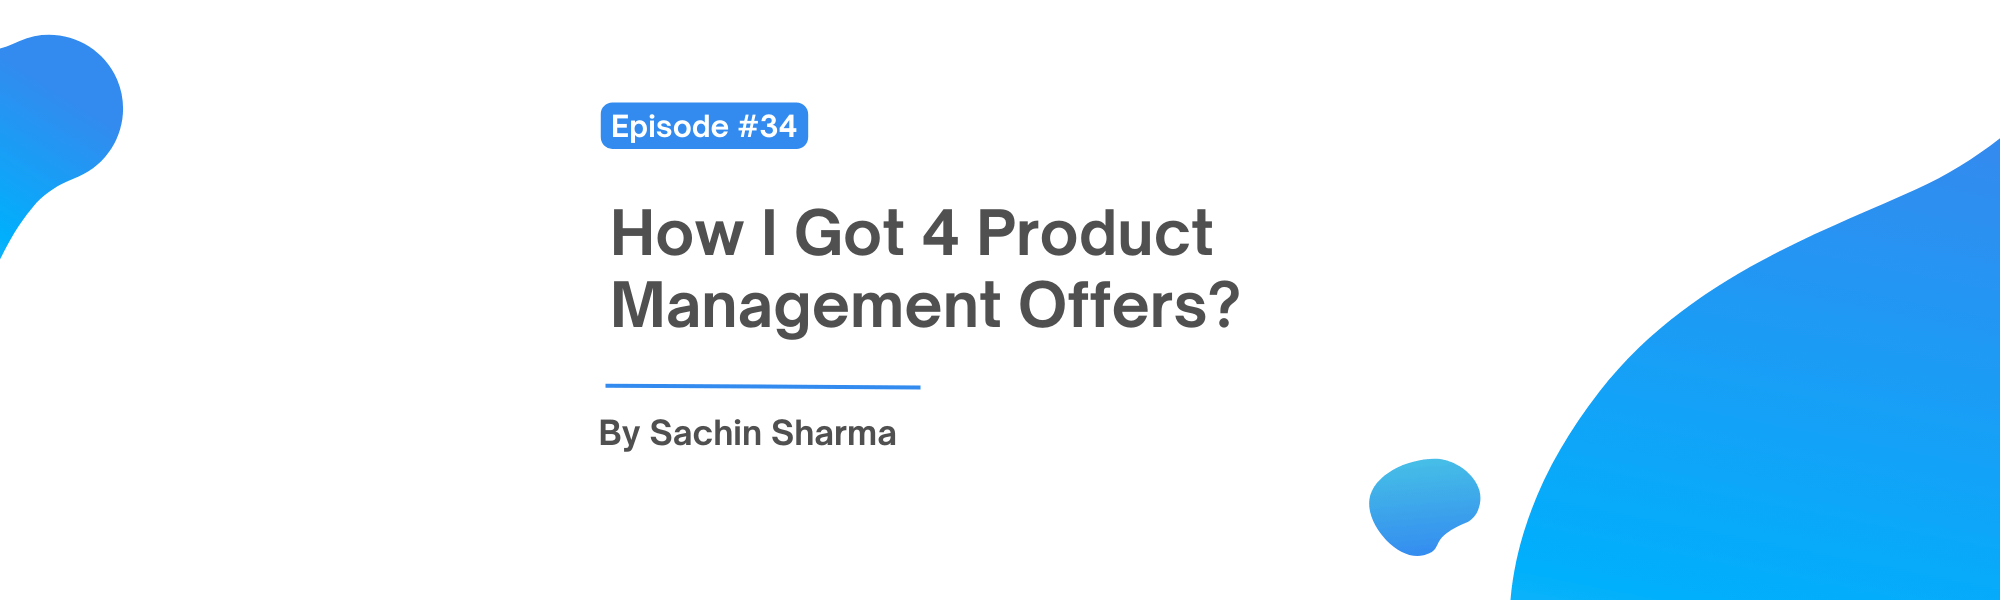 How I Got 4 Product Management Offers?